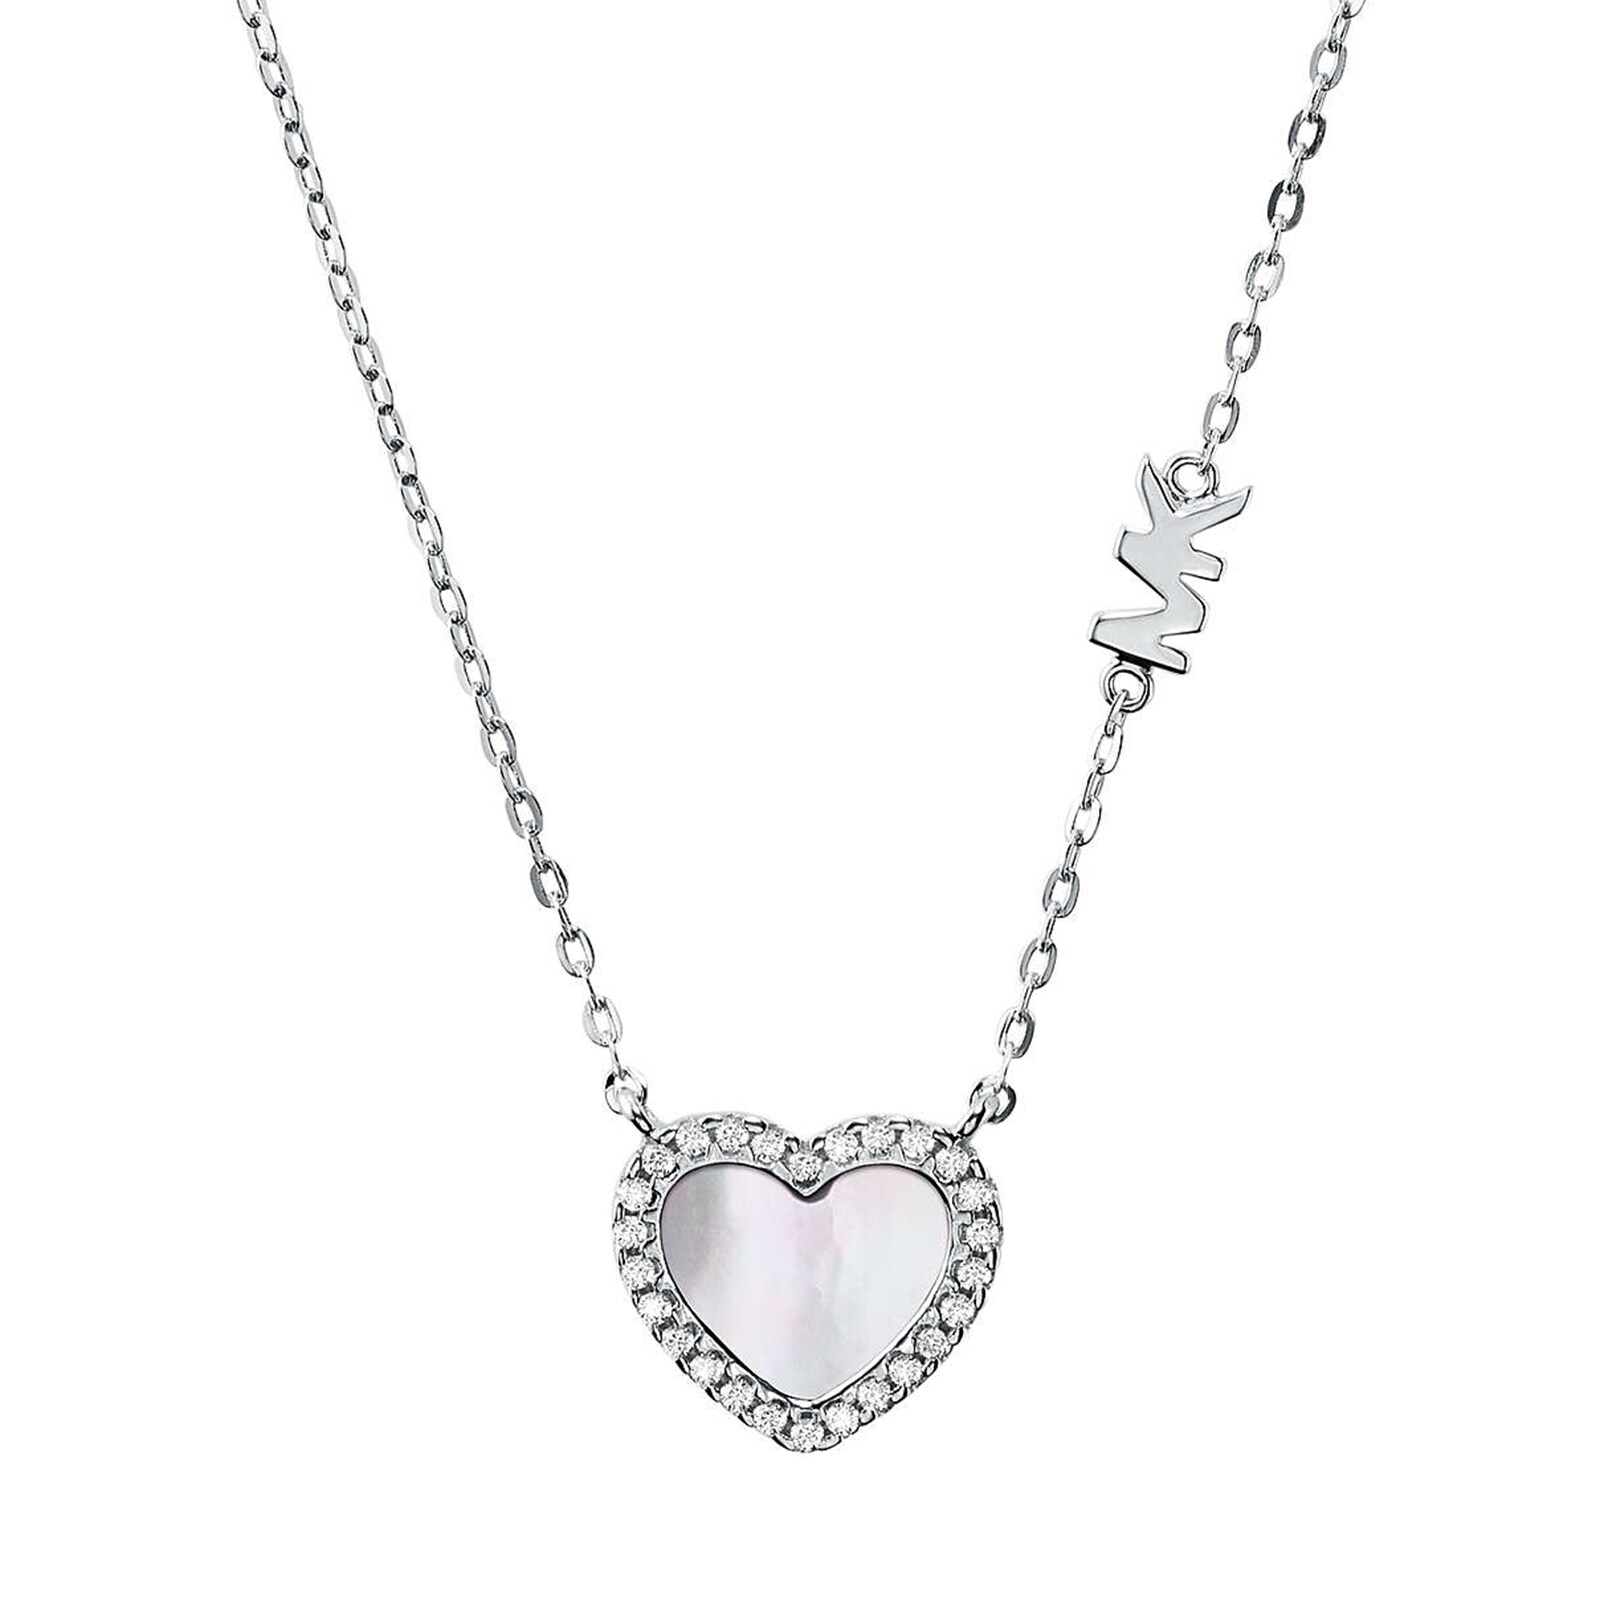 Michael Kors Pink Heart Necklace With Stones - Michael Kors - Fallers.com -  Fallers Irish Jewelry